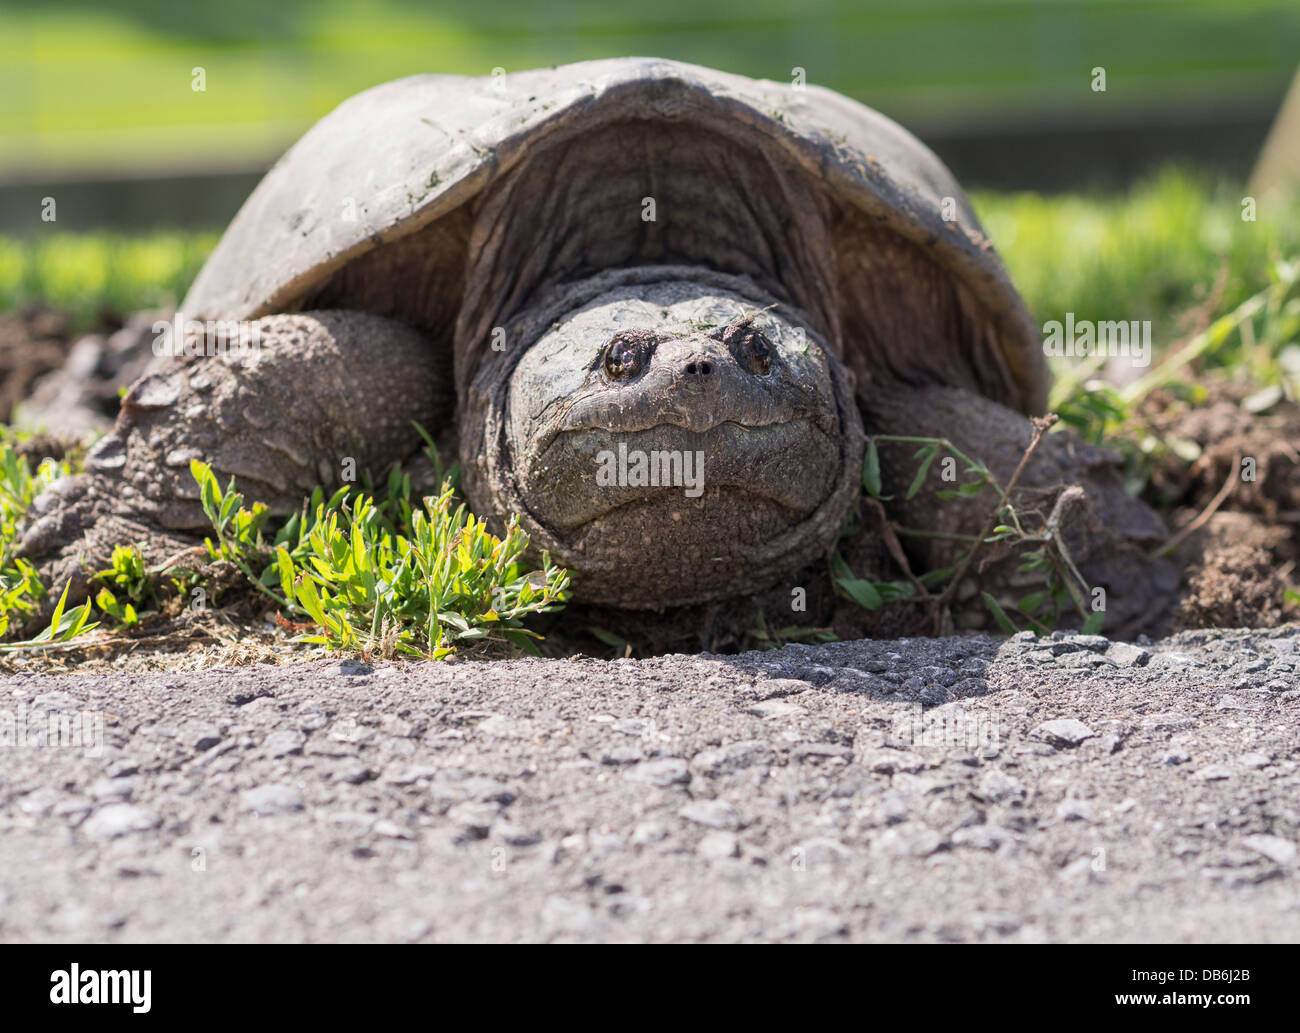 Female Snapping Turtle at road. Large turtle laying eggs at the side of a road. Ottawa, Ontario, Canada Stock Photo